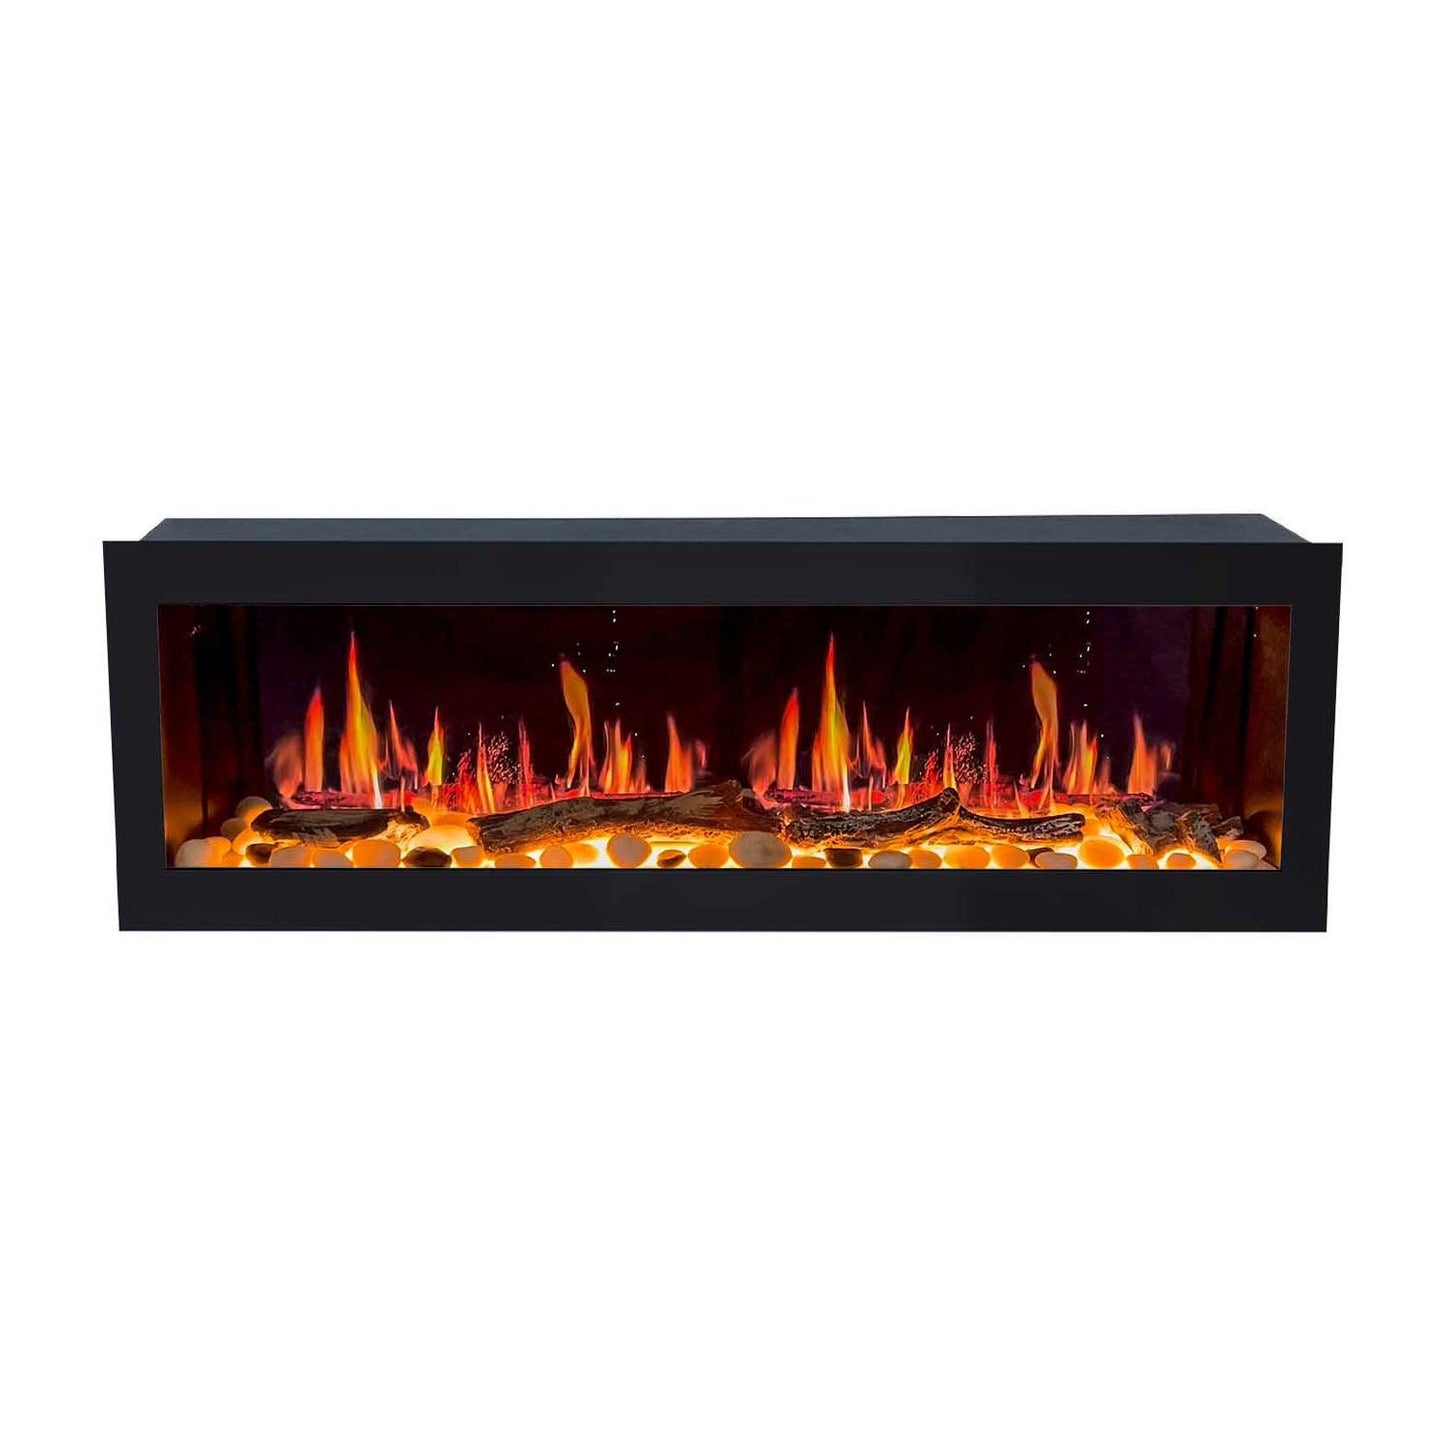 ZopaFlame™ 47" Linear Wall-mount Electric Fireplace - BP17488X - ZopaFlame Fireplaces